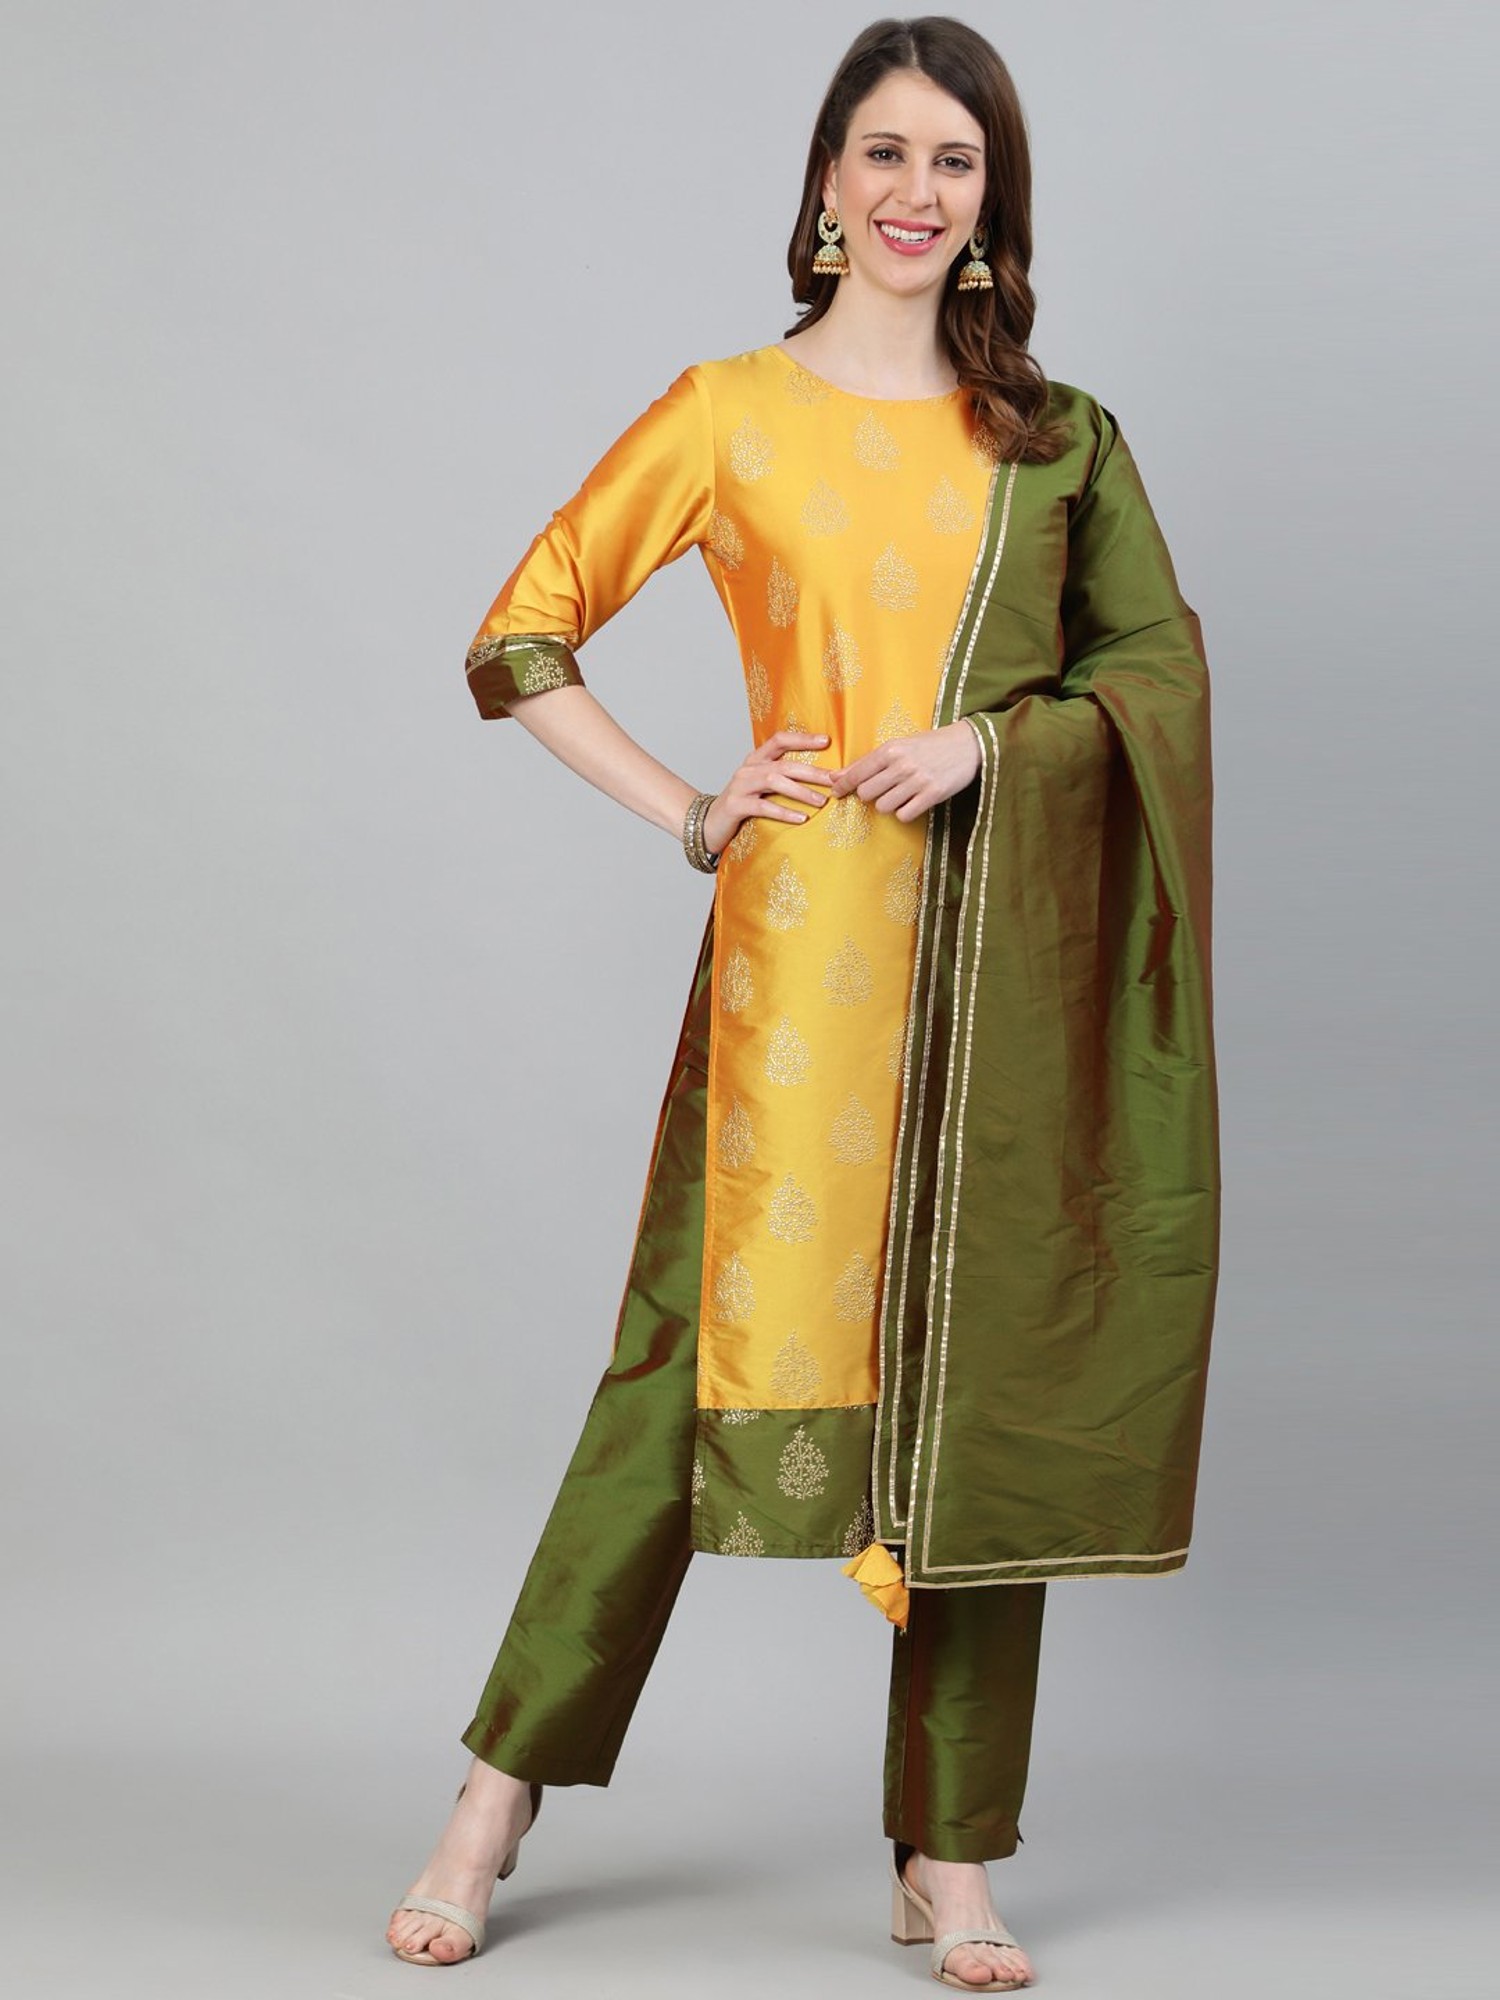 Fancy Designer Brown Foil And Gold Printed Kurti And Pant With Jacket.